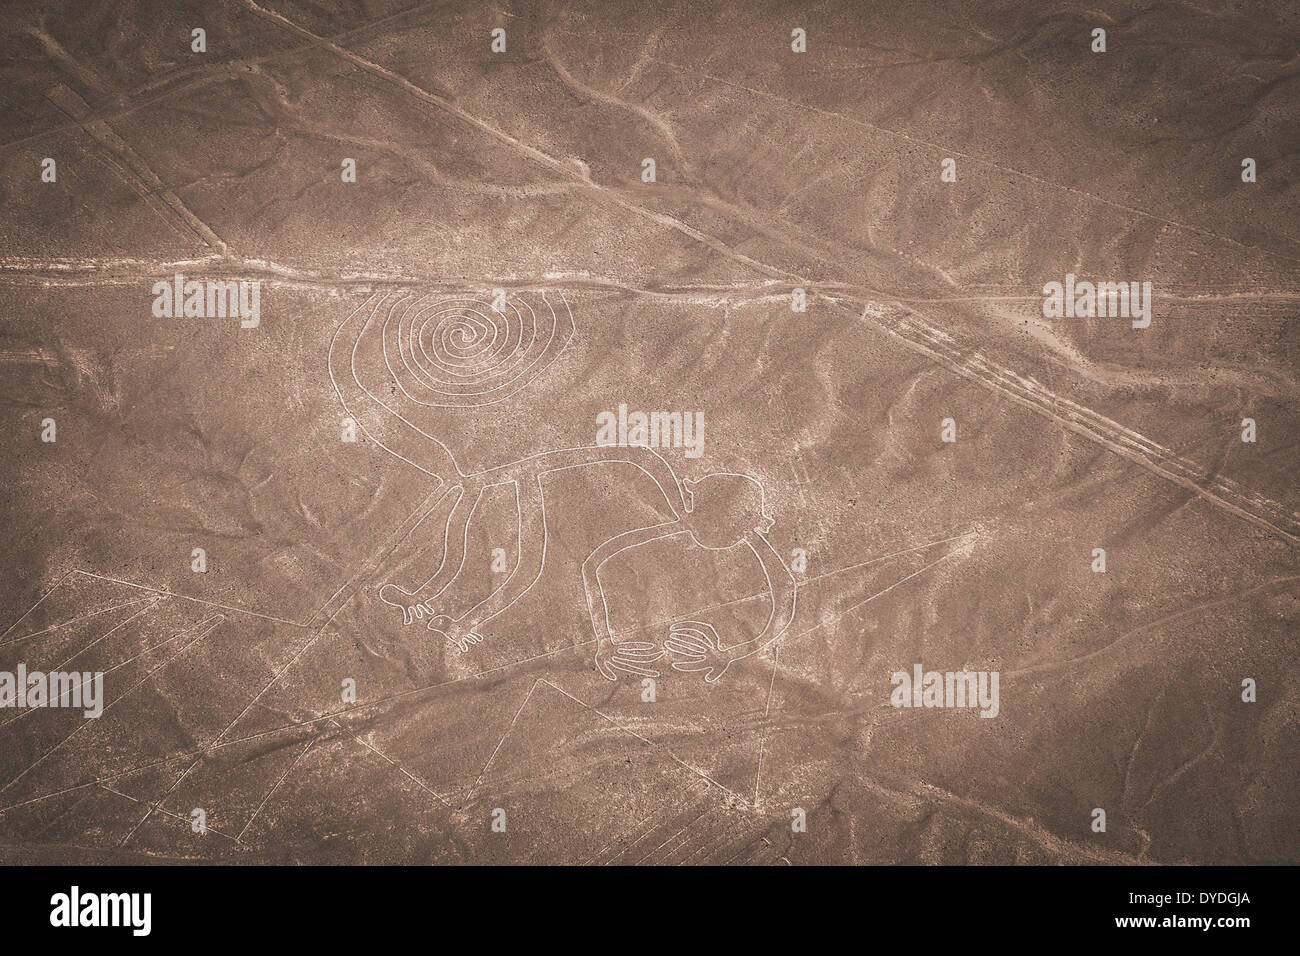 Nazca Lines featuring The Monkey. Stock Photo